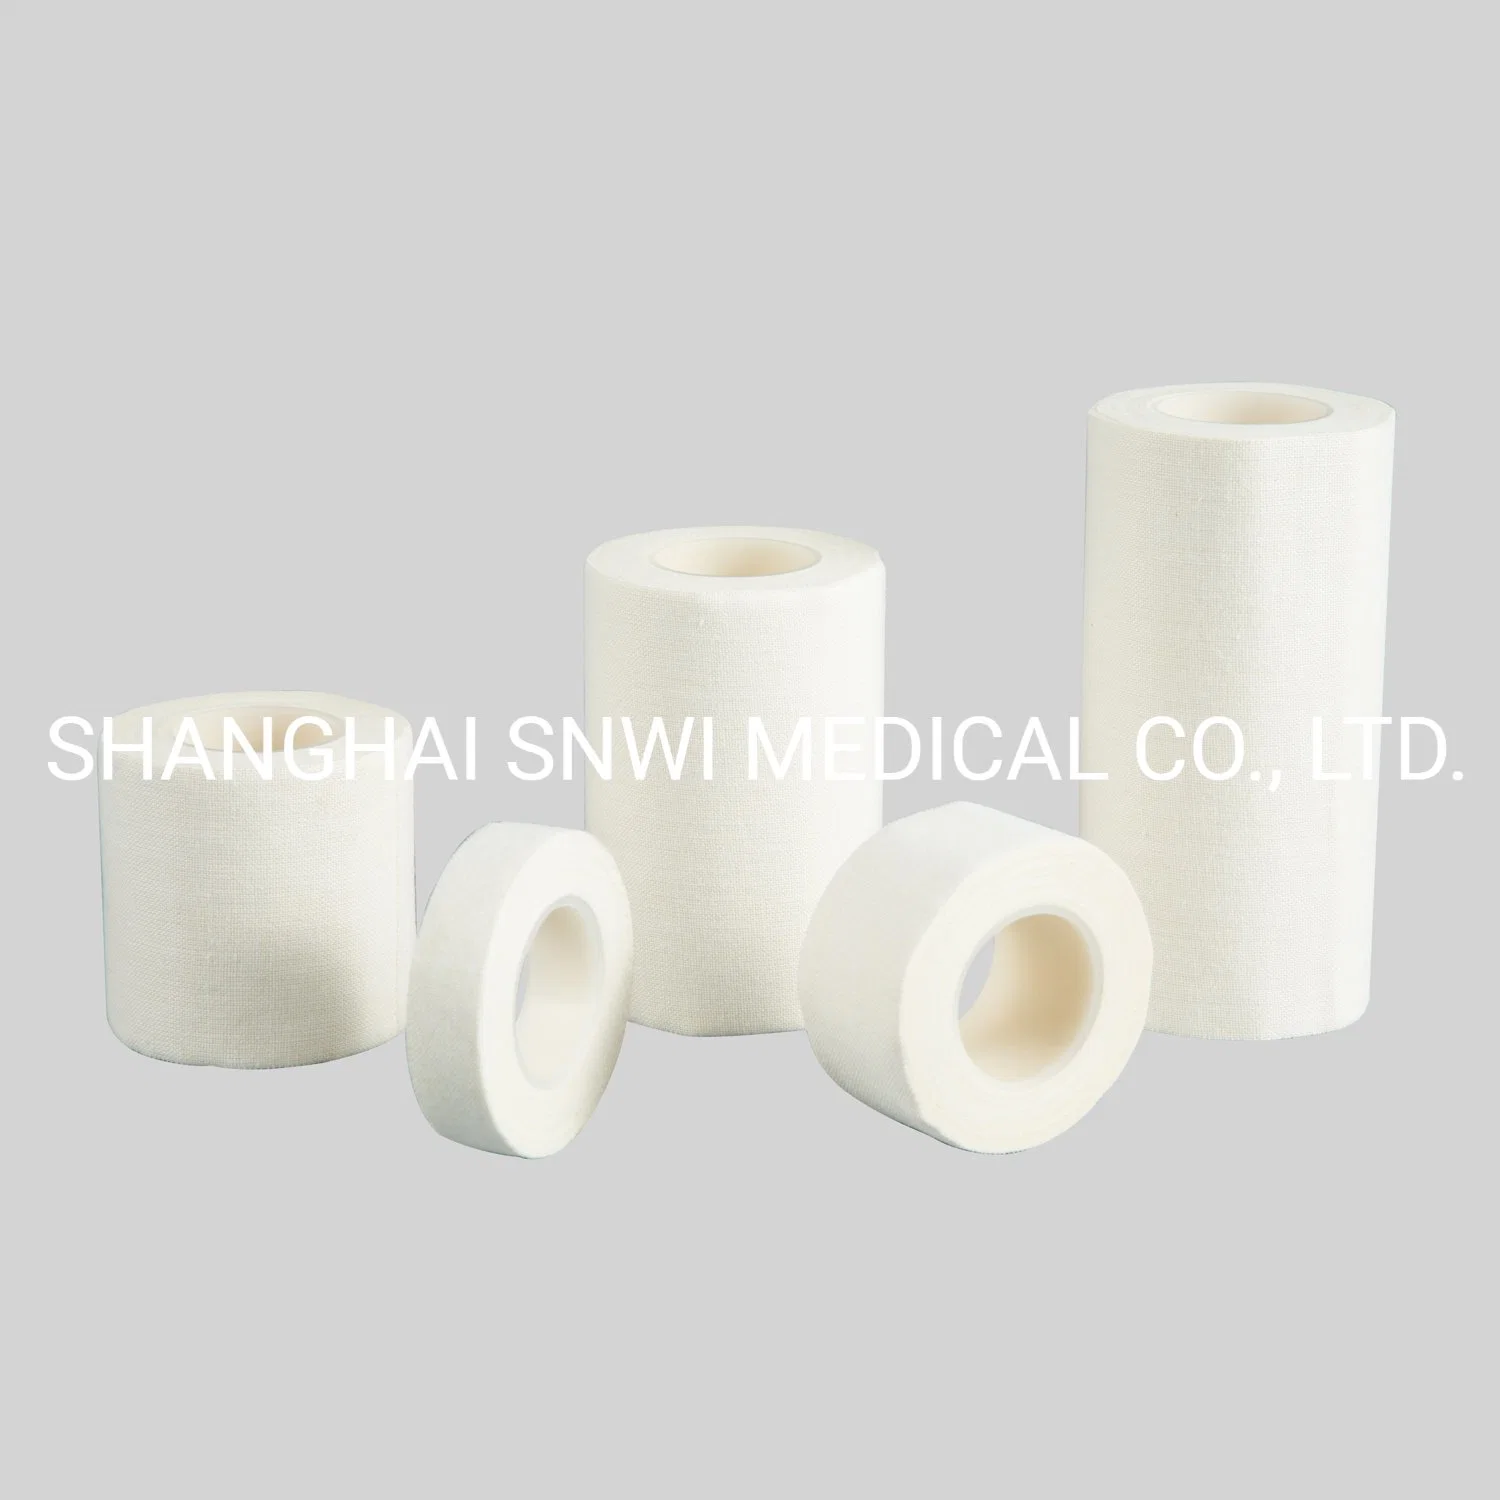 Medical Surgical Adhesive Plaster Micropore Non Woven Paper Tape